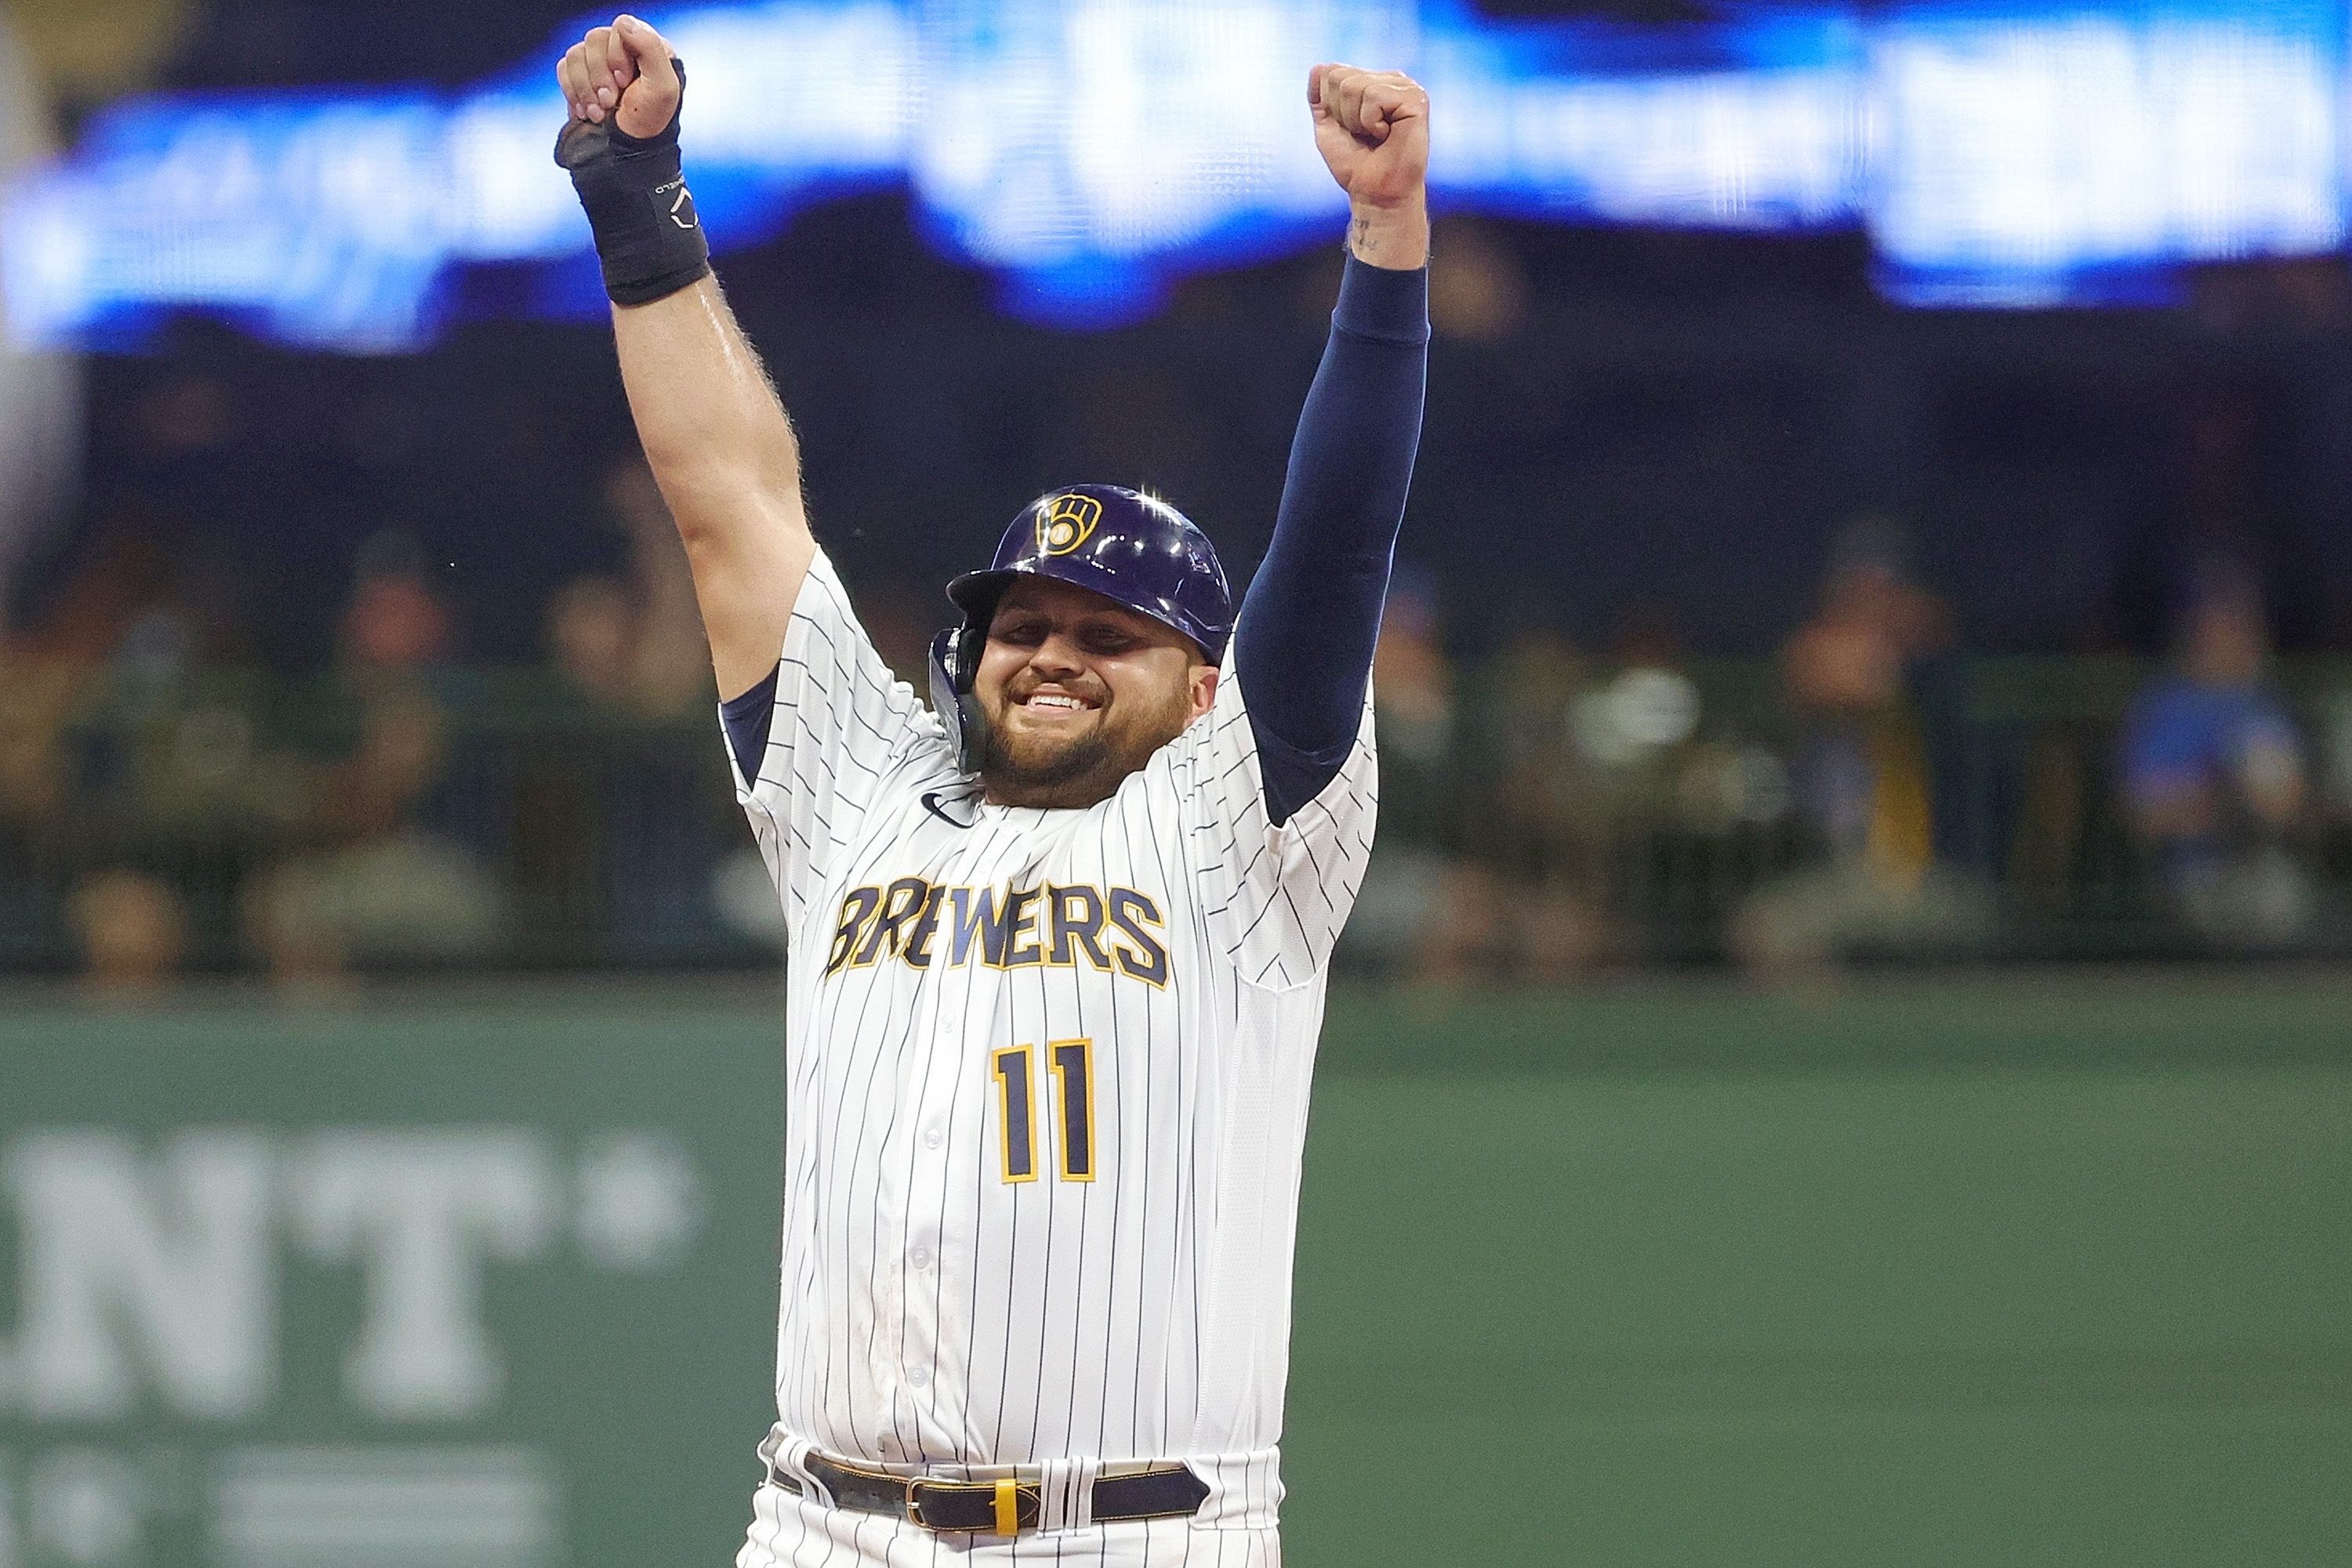 Rowdy Tellez #11 of the Milwaukee Brewers reacts after stealing second base during the third inning against the Cincinnati Reds at American Family Field on August 05, 2022 in Milwaukee, Wisconsin.